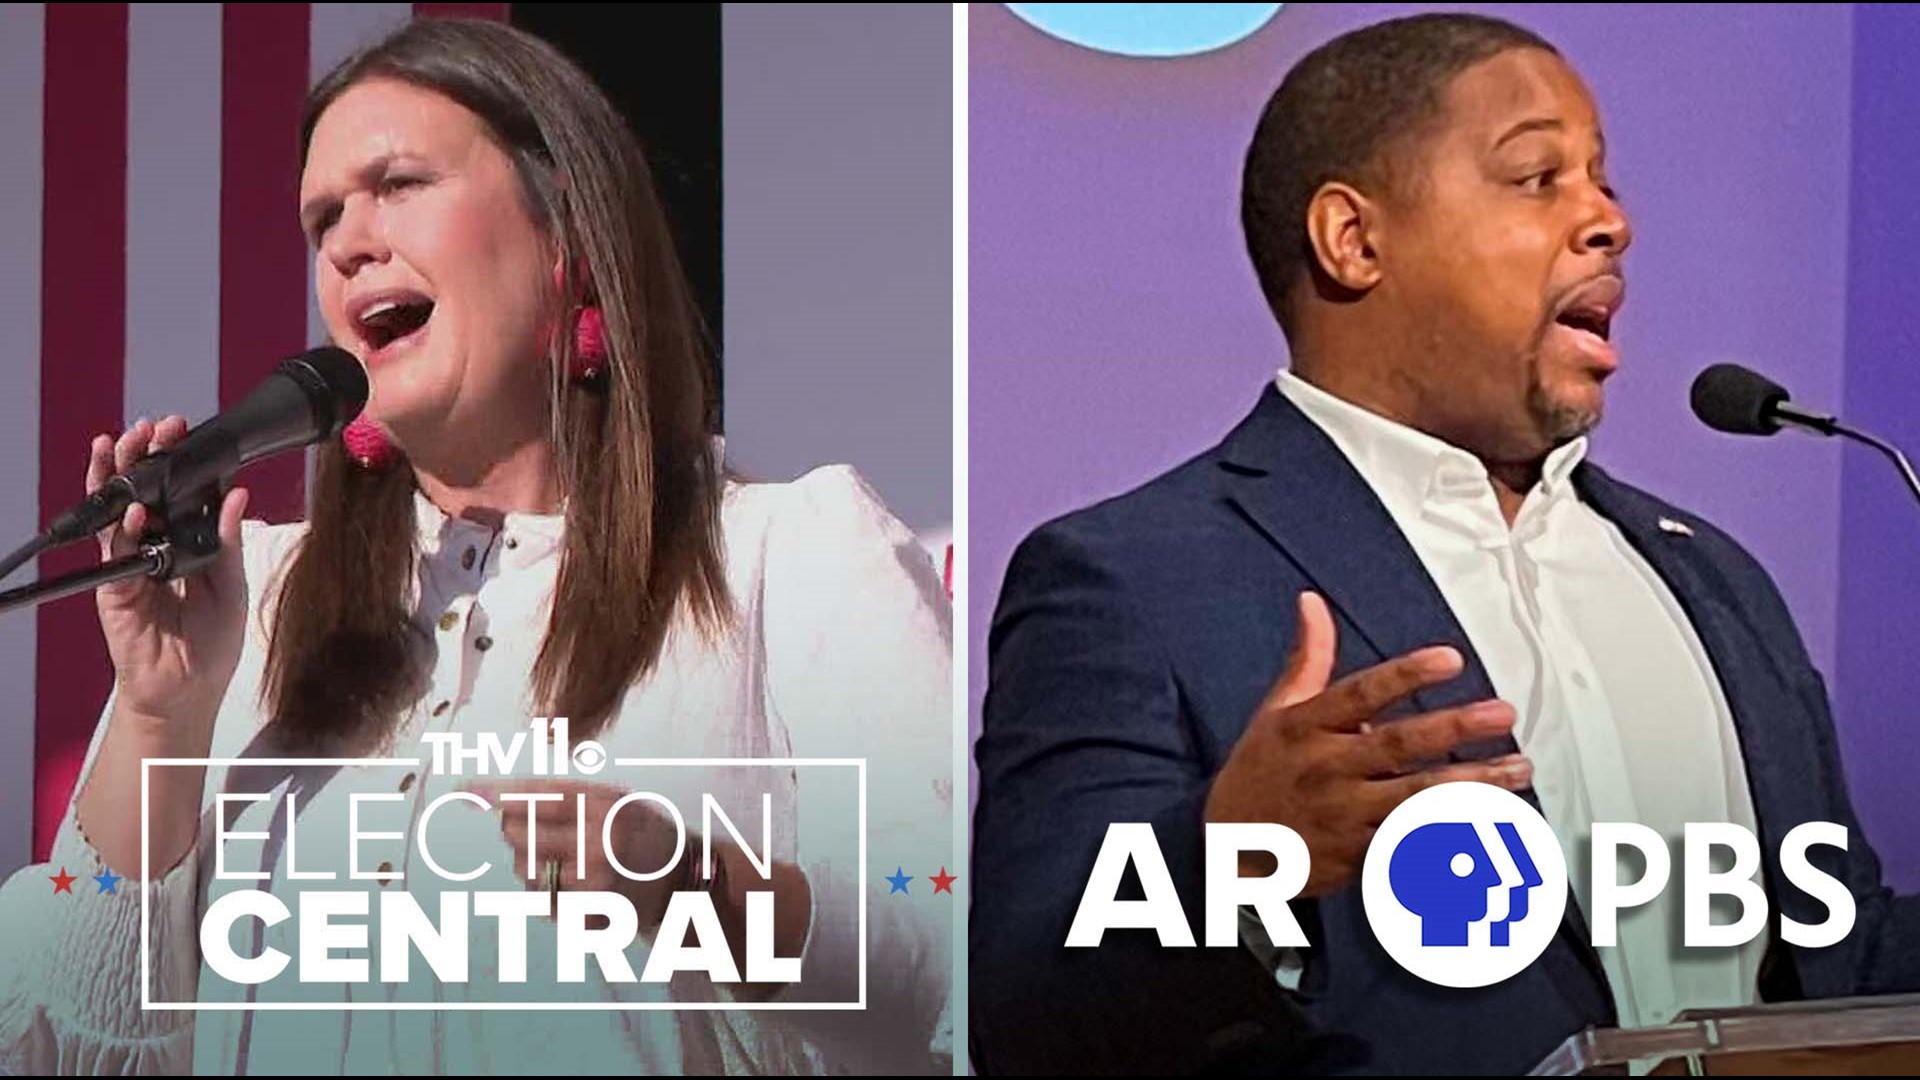 Arkansas Governor candidates Sarah Huckabee Sanders (R), Chris Jones (D), and Ricky Harrington (L) debate, which is being hosted by Arkansas PBS.